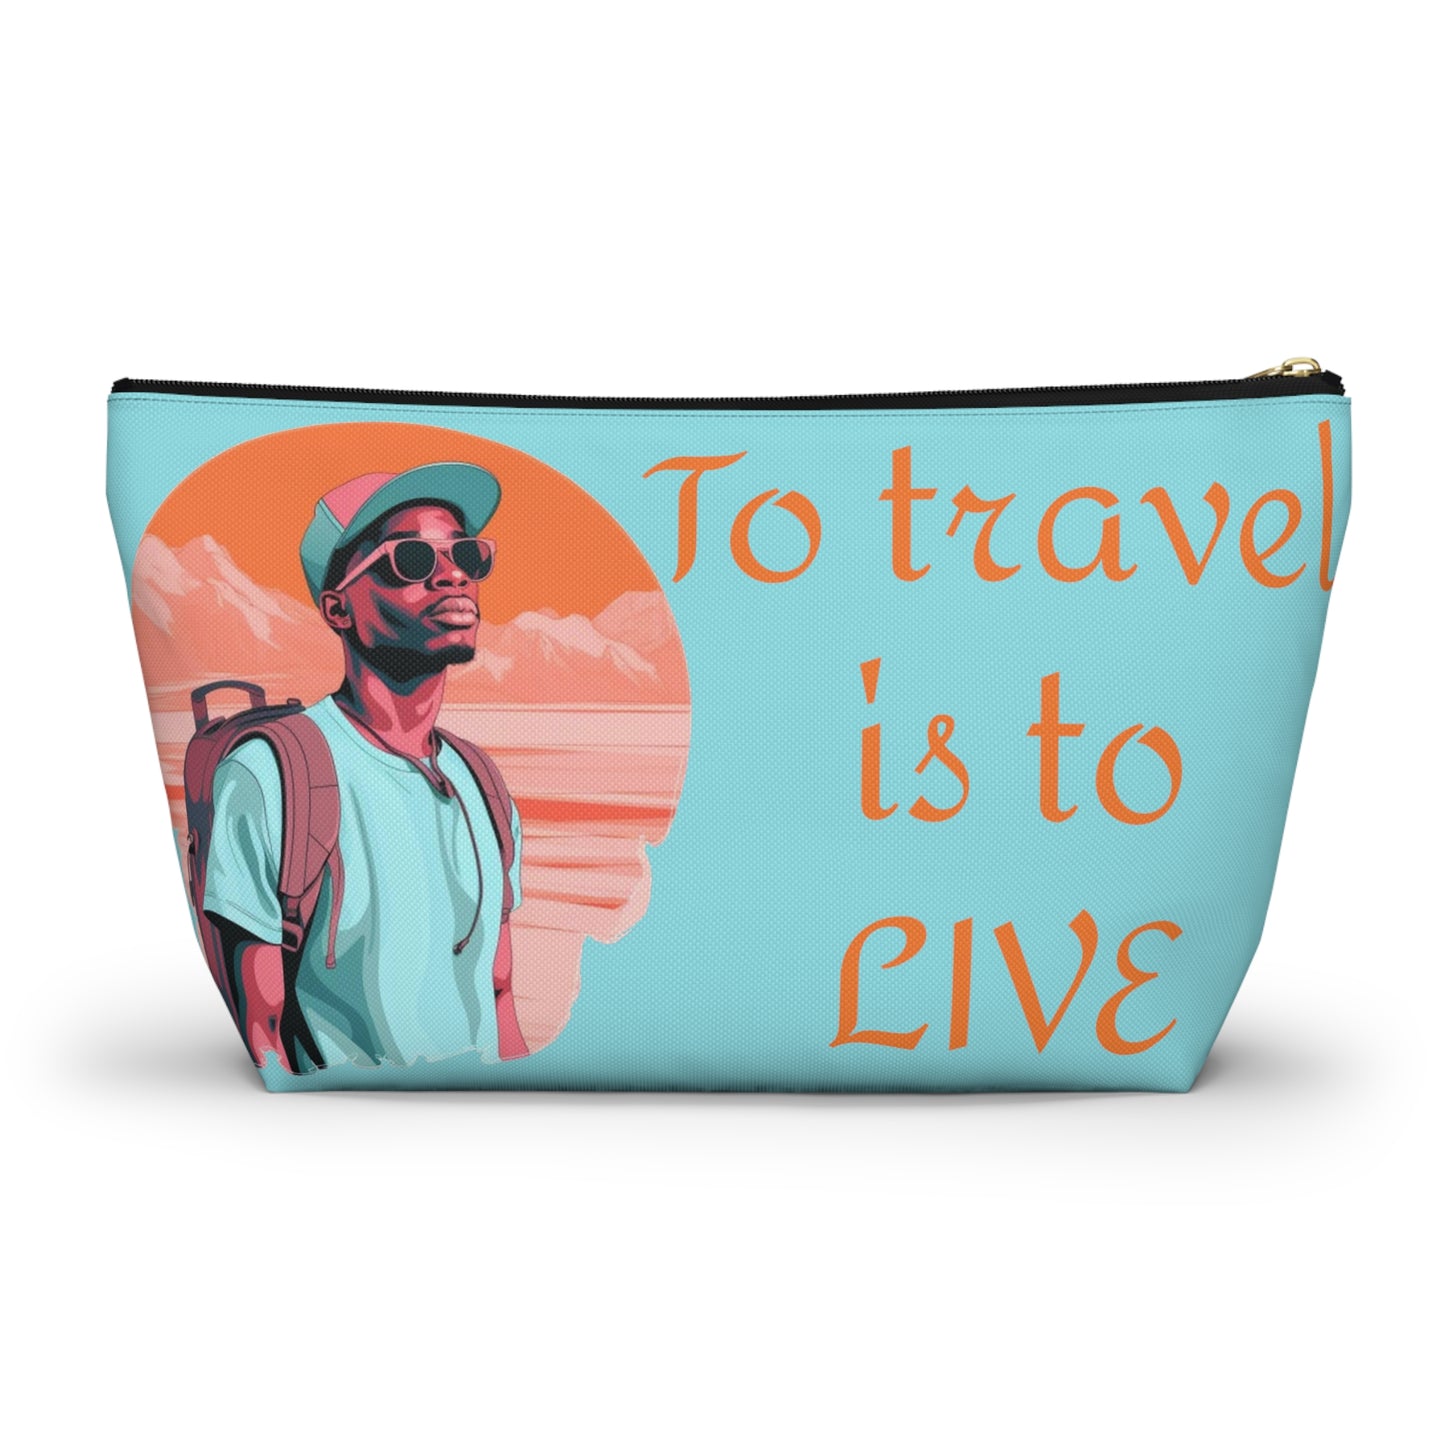 Travel-Ready Accessory Pouch with Inspiring Designs (TO TRAVEL IS TO LIVE)